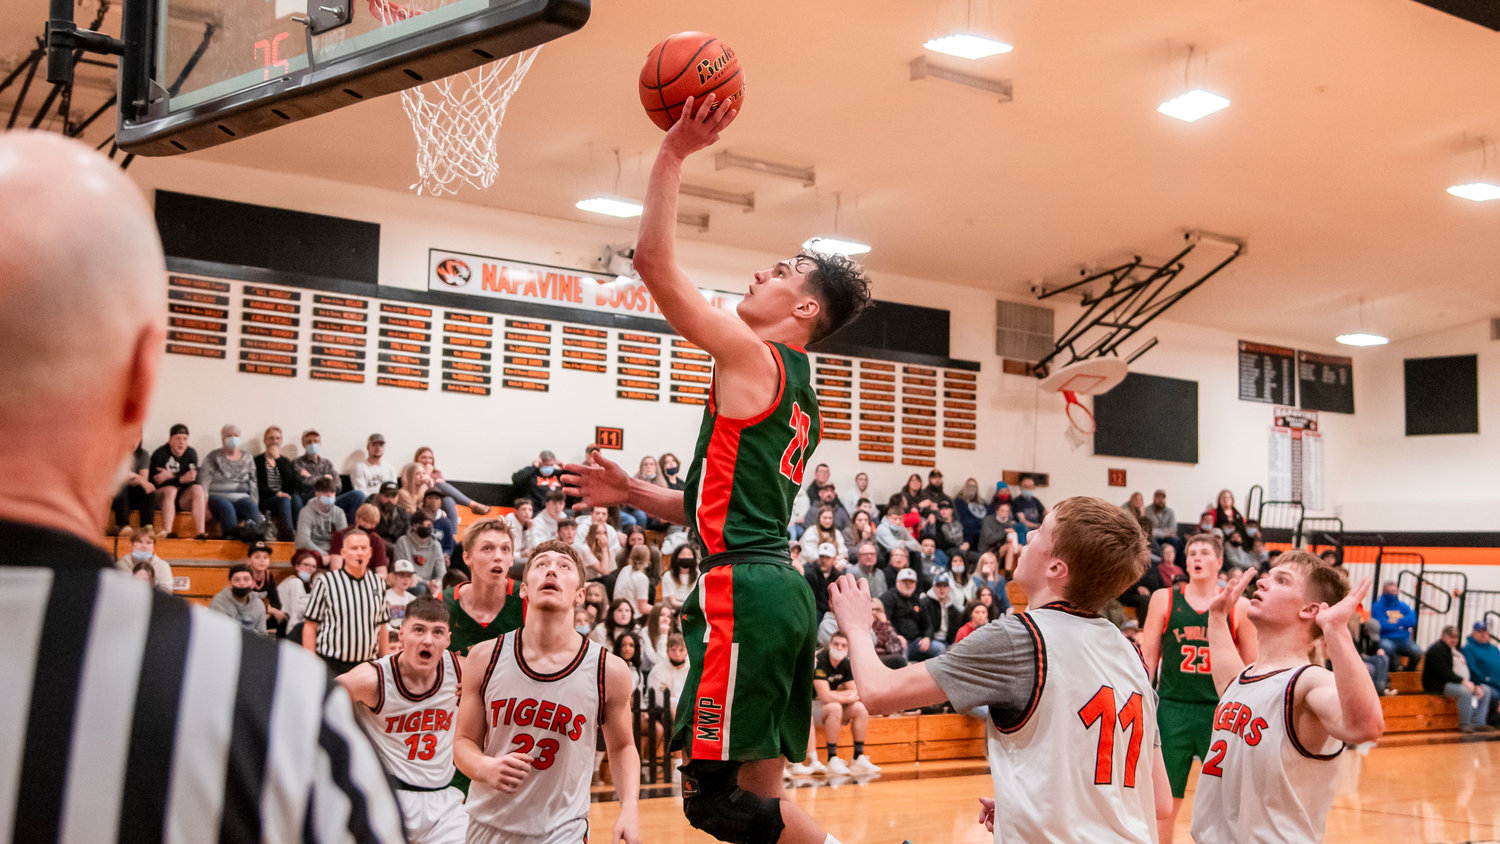 MWP’s Kysen Collette (20) scores with a layup during a game against the Tigers in Napavine Tuesday night.